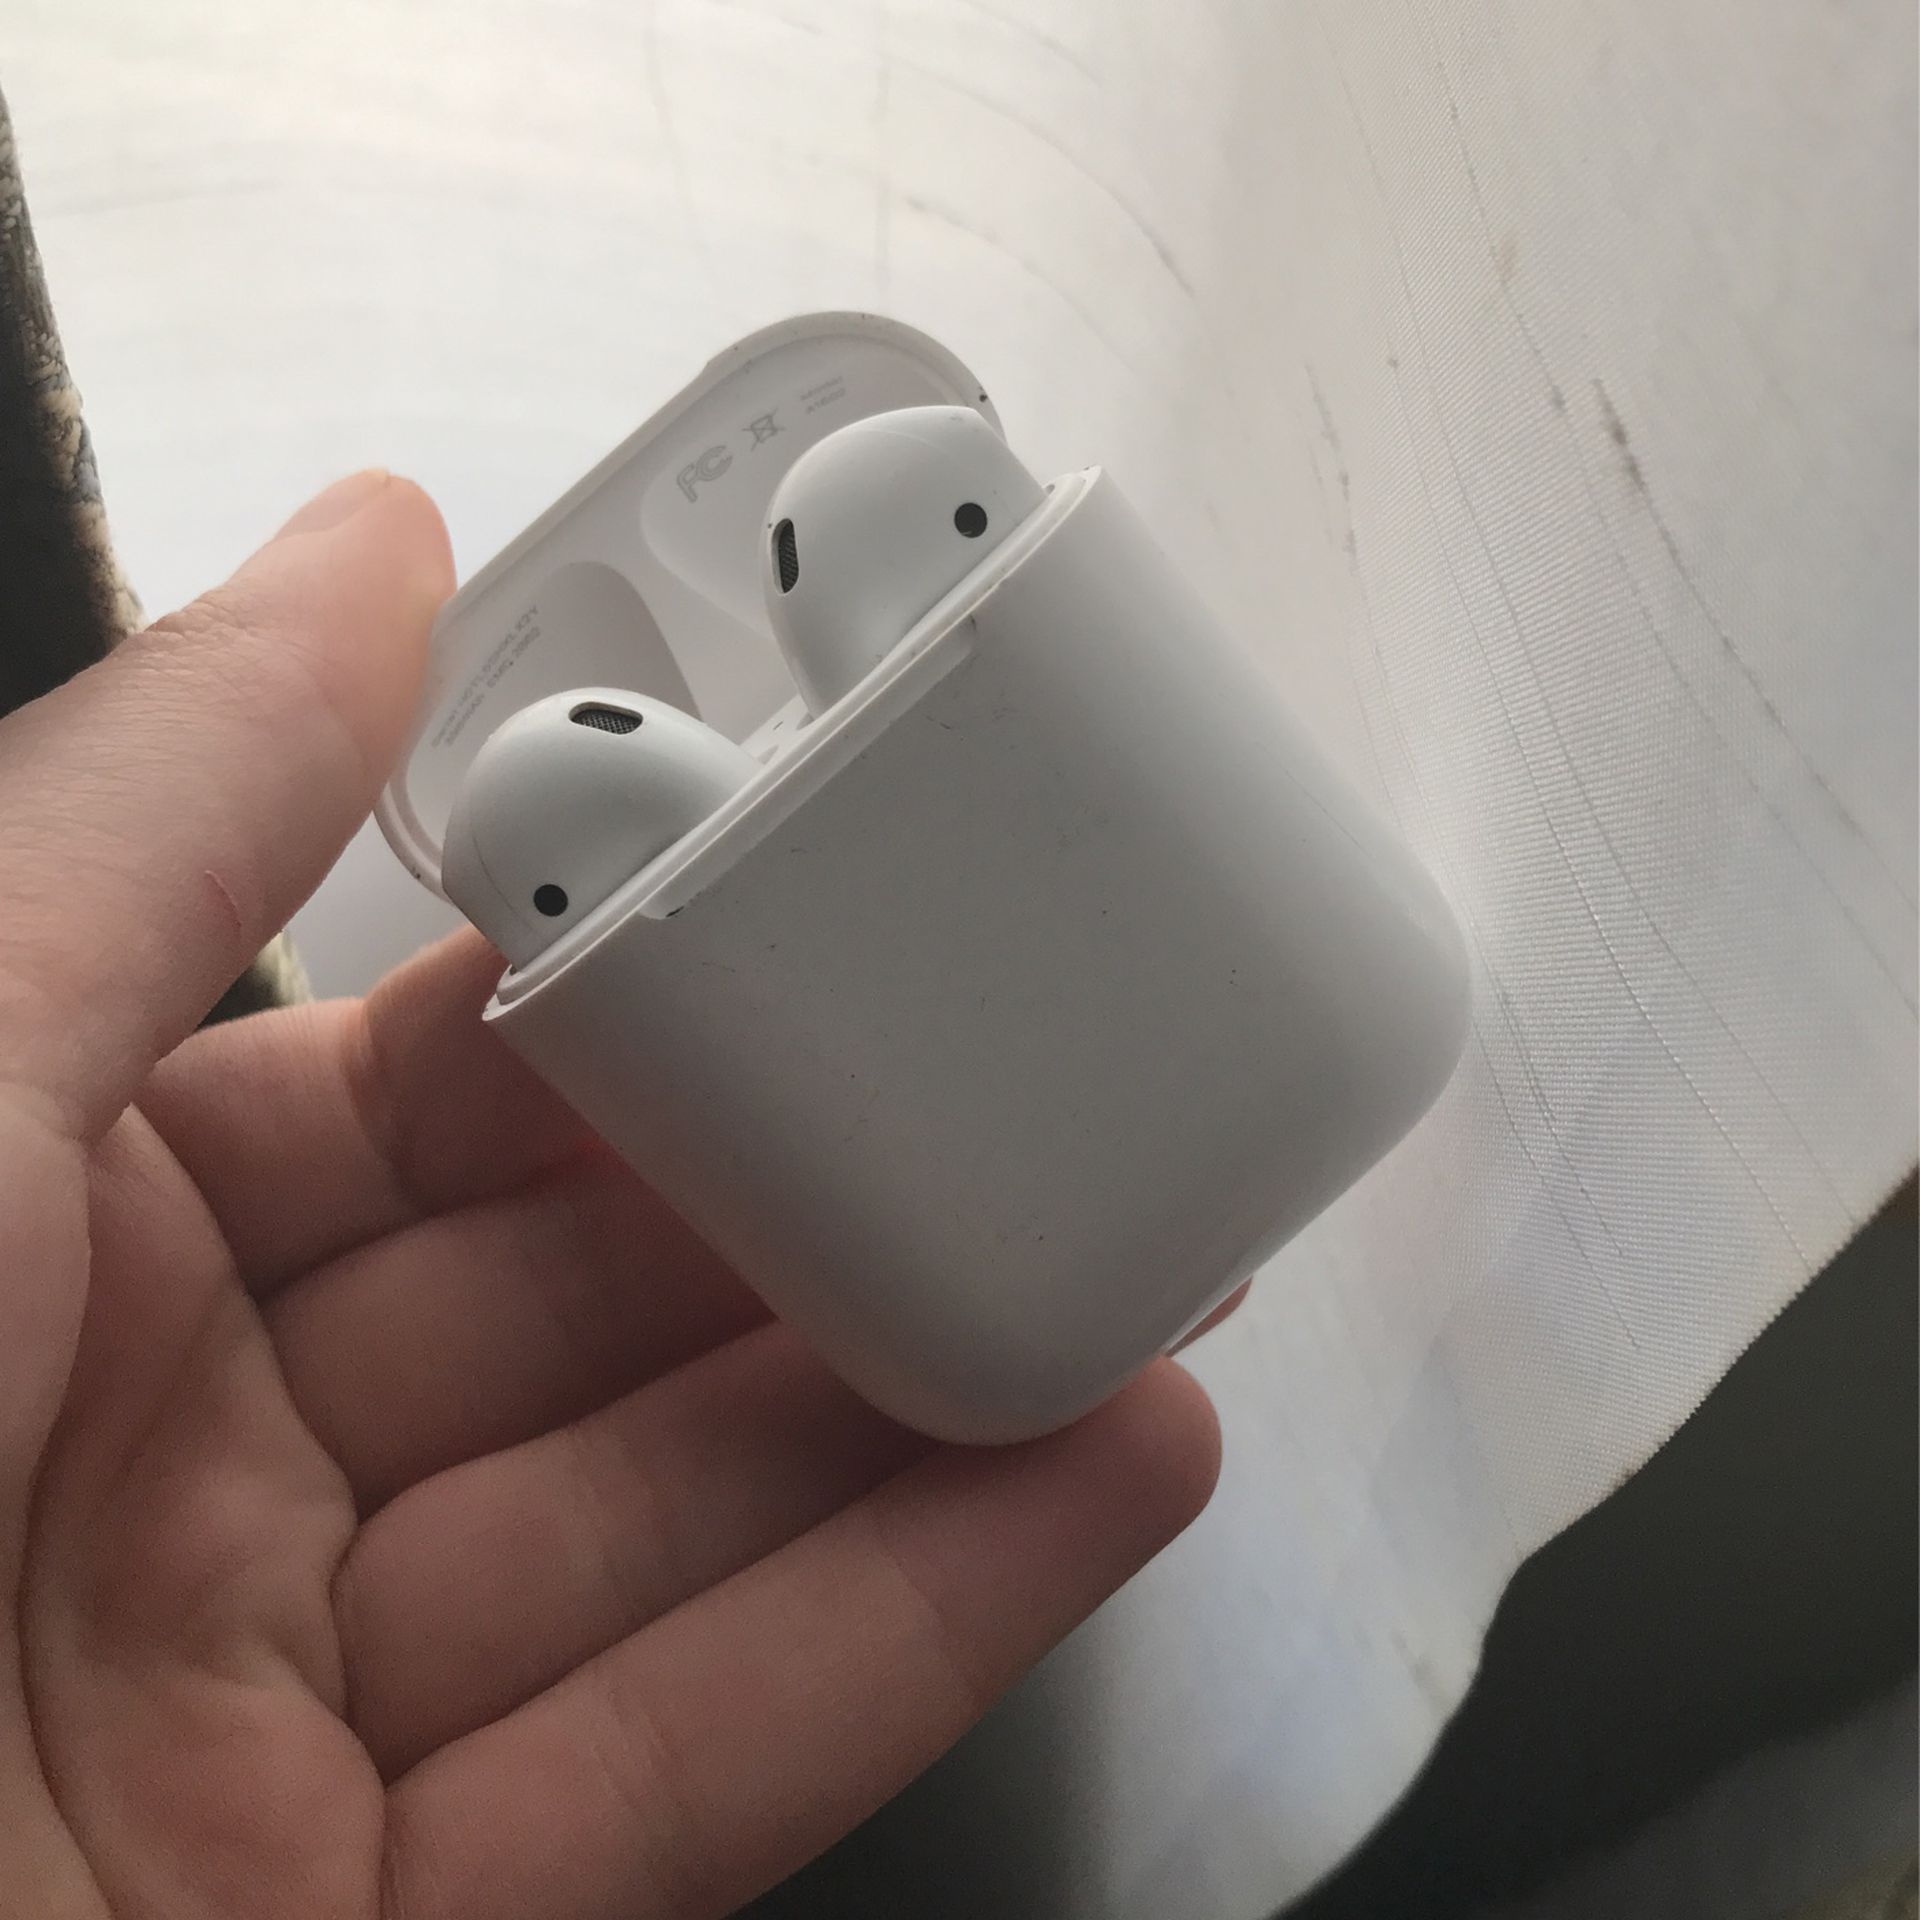 AirPods Perfect Condition 